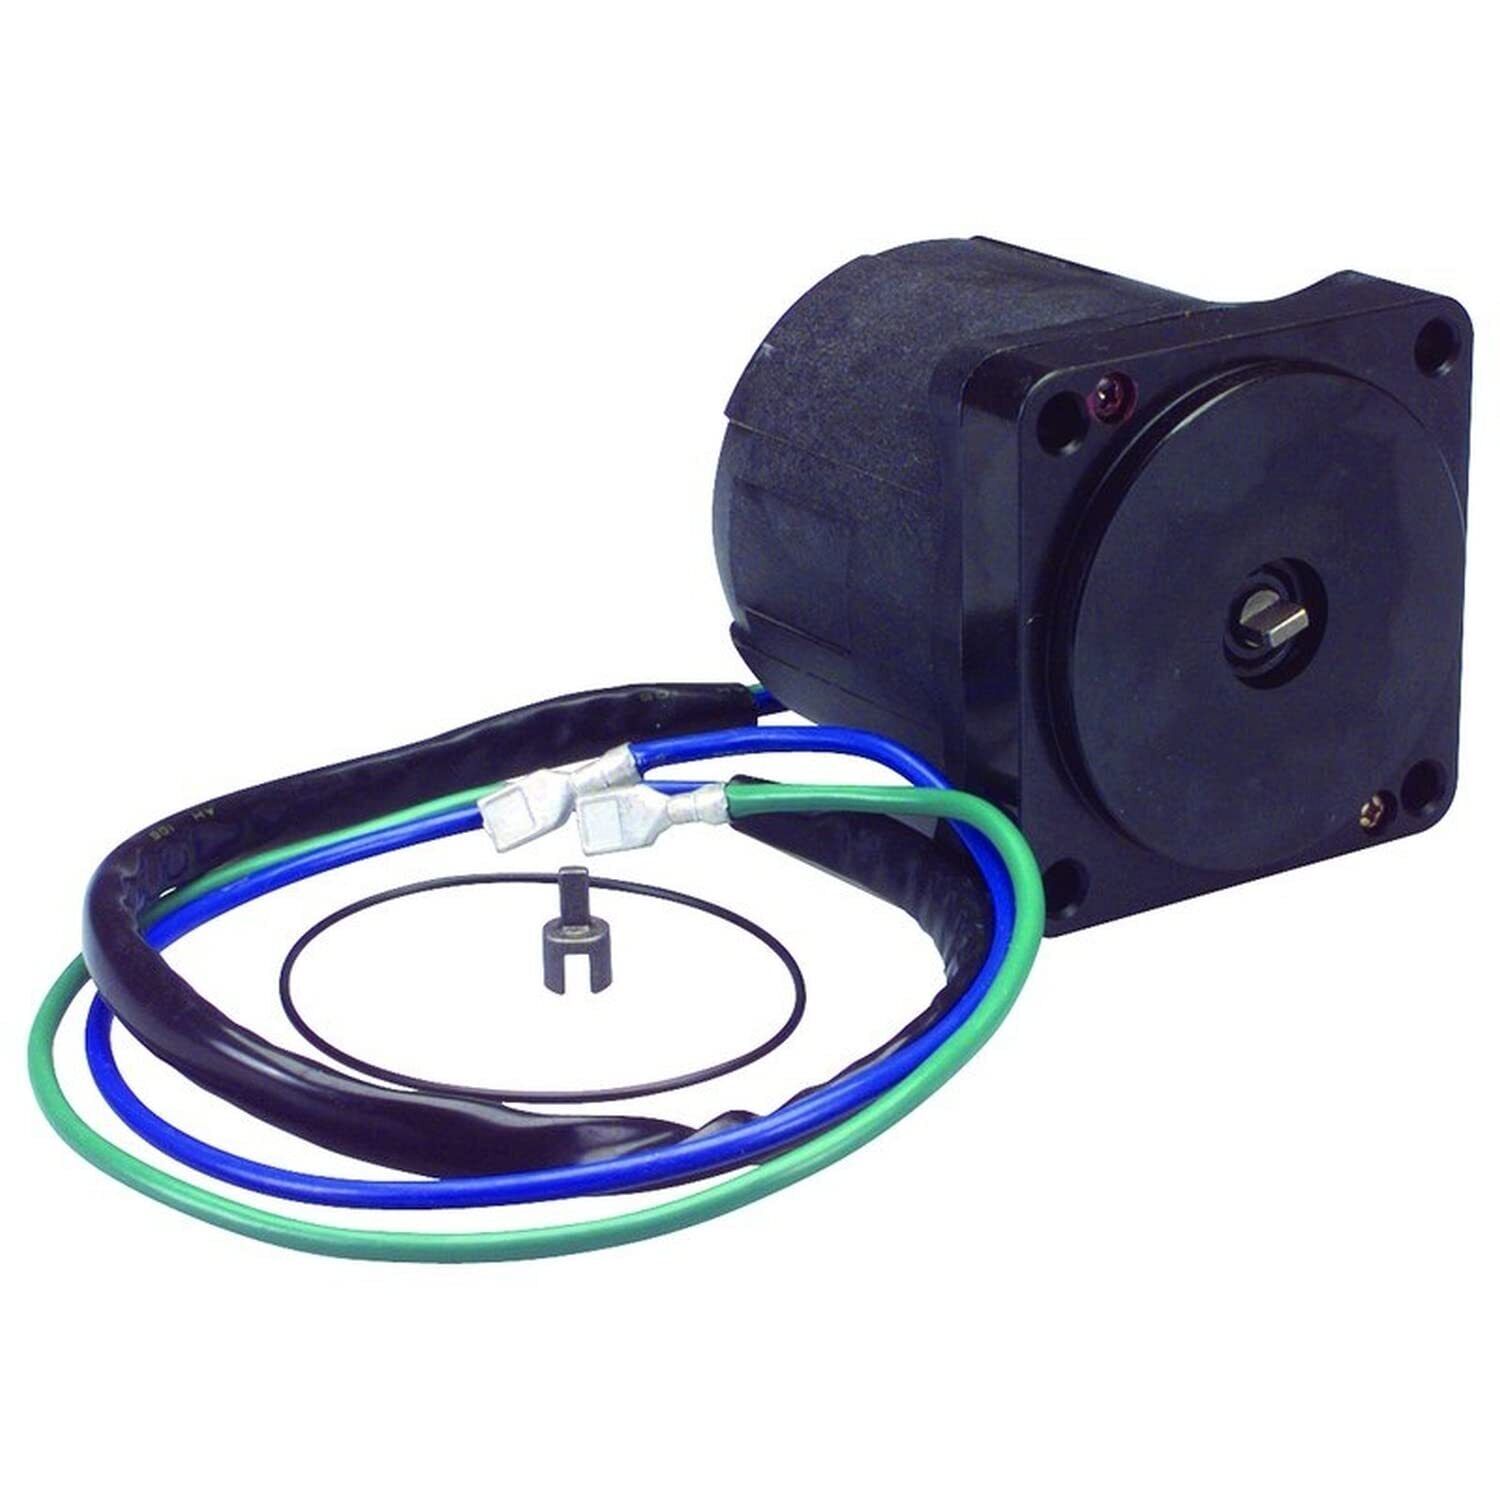 New Tilt Trim Motor Compatible With Outboard Marine OMC, Evinrude, Johnson 2-Wir